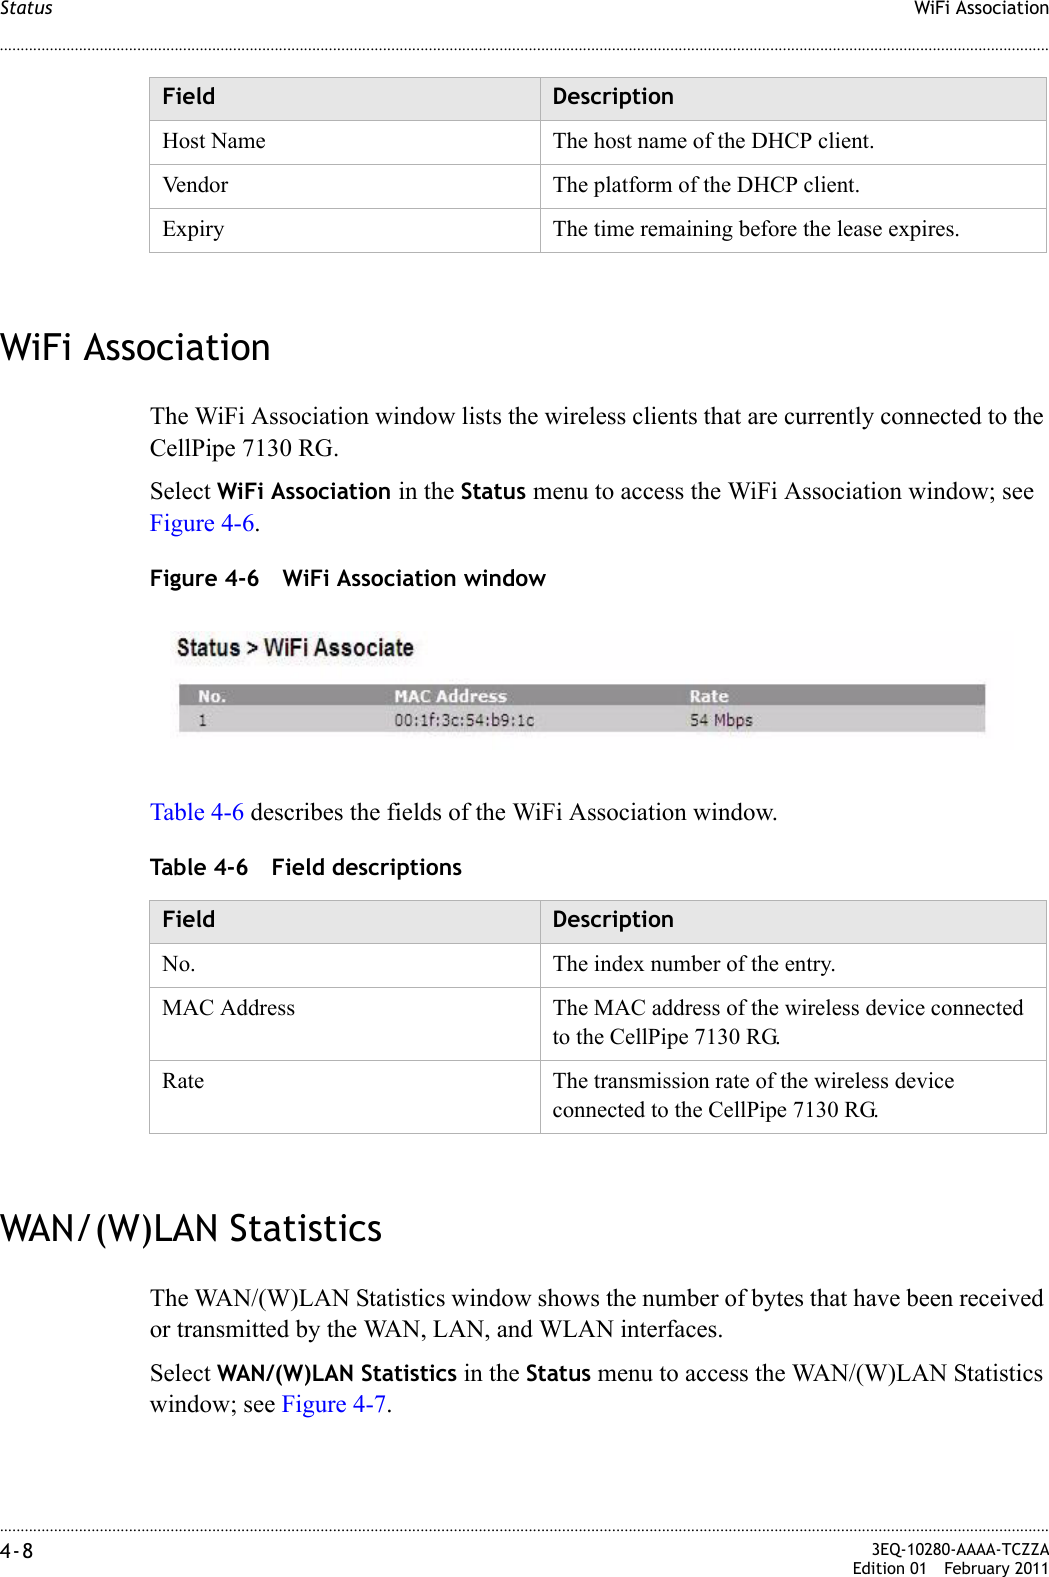 ............................................................................................................................................................................................................................................................WiFi AssociationStatus4-8  3EQ-10280-AAAA-TCZZAEdition 01 February 2011............................................................................................................................................................................................................................................................WiFi AssociationThe WiFi Association window lists the wireless clients that are currently connected to the CellPipe 7130 RG.Select WiFi Association in the Status menu to access the WiFi Association window; see Figure 4-6.Figure 4-6 WiFi Association windowTable 4-6 describes the fields of the WiFi Association window.Table 4-6 Field descriptionsWAN/(W)LAN StatisticsThe WAN/(W)LAN Statistics window shows the number of bytes that have been received or transmitted by the WAN, LAN, and WLAN interfaces.Select WAN/(W)LAN Statistics in the Status menu to access the WAN/(W)LAN Statistics window; see Figure 4-7.Host Name The host name of the DHCP client.Vendor  The platform of the DHCP client.Expiry The time remaining before the lease expires.Field DescriptionField DescriptionNo. The index number of the entry.MAC Address The MAC address of the wireless device connected to the CellPipe 7130 RG.Rate The transmission rate of the wireless device connected to the CellPipe 7130 RG.